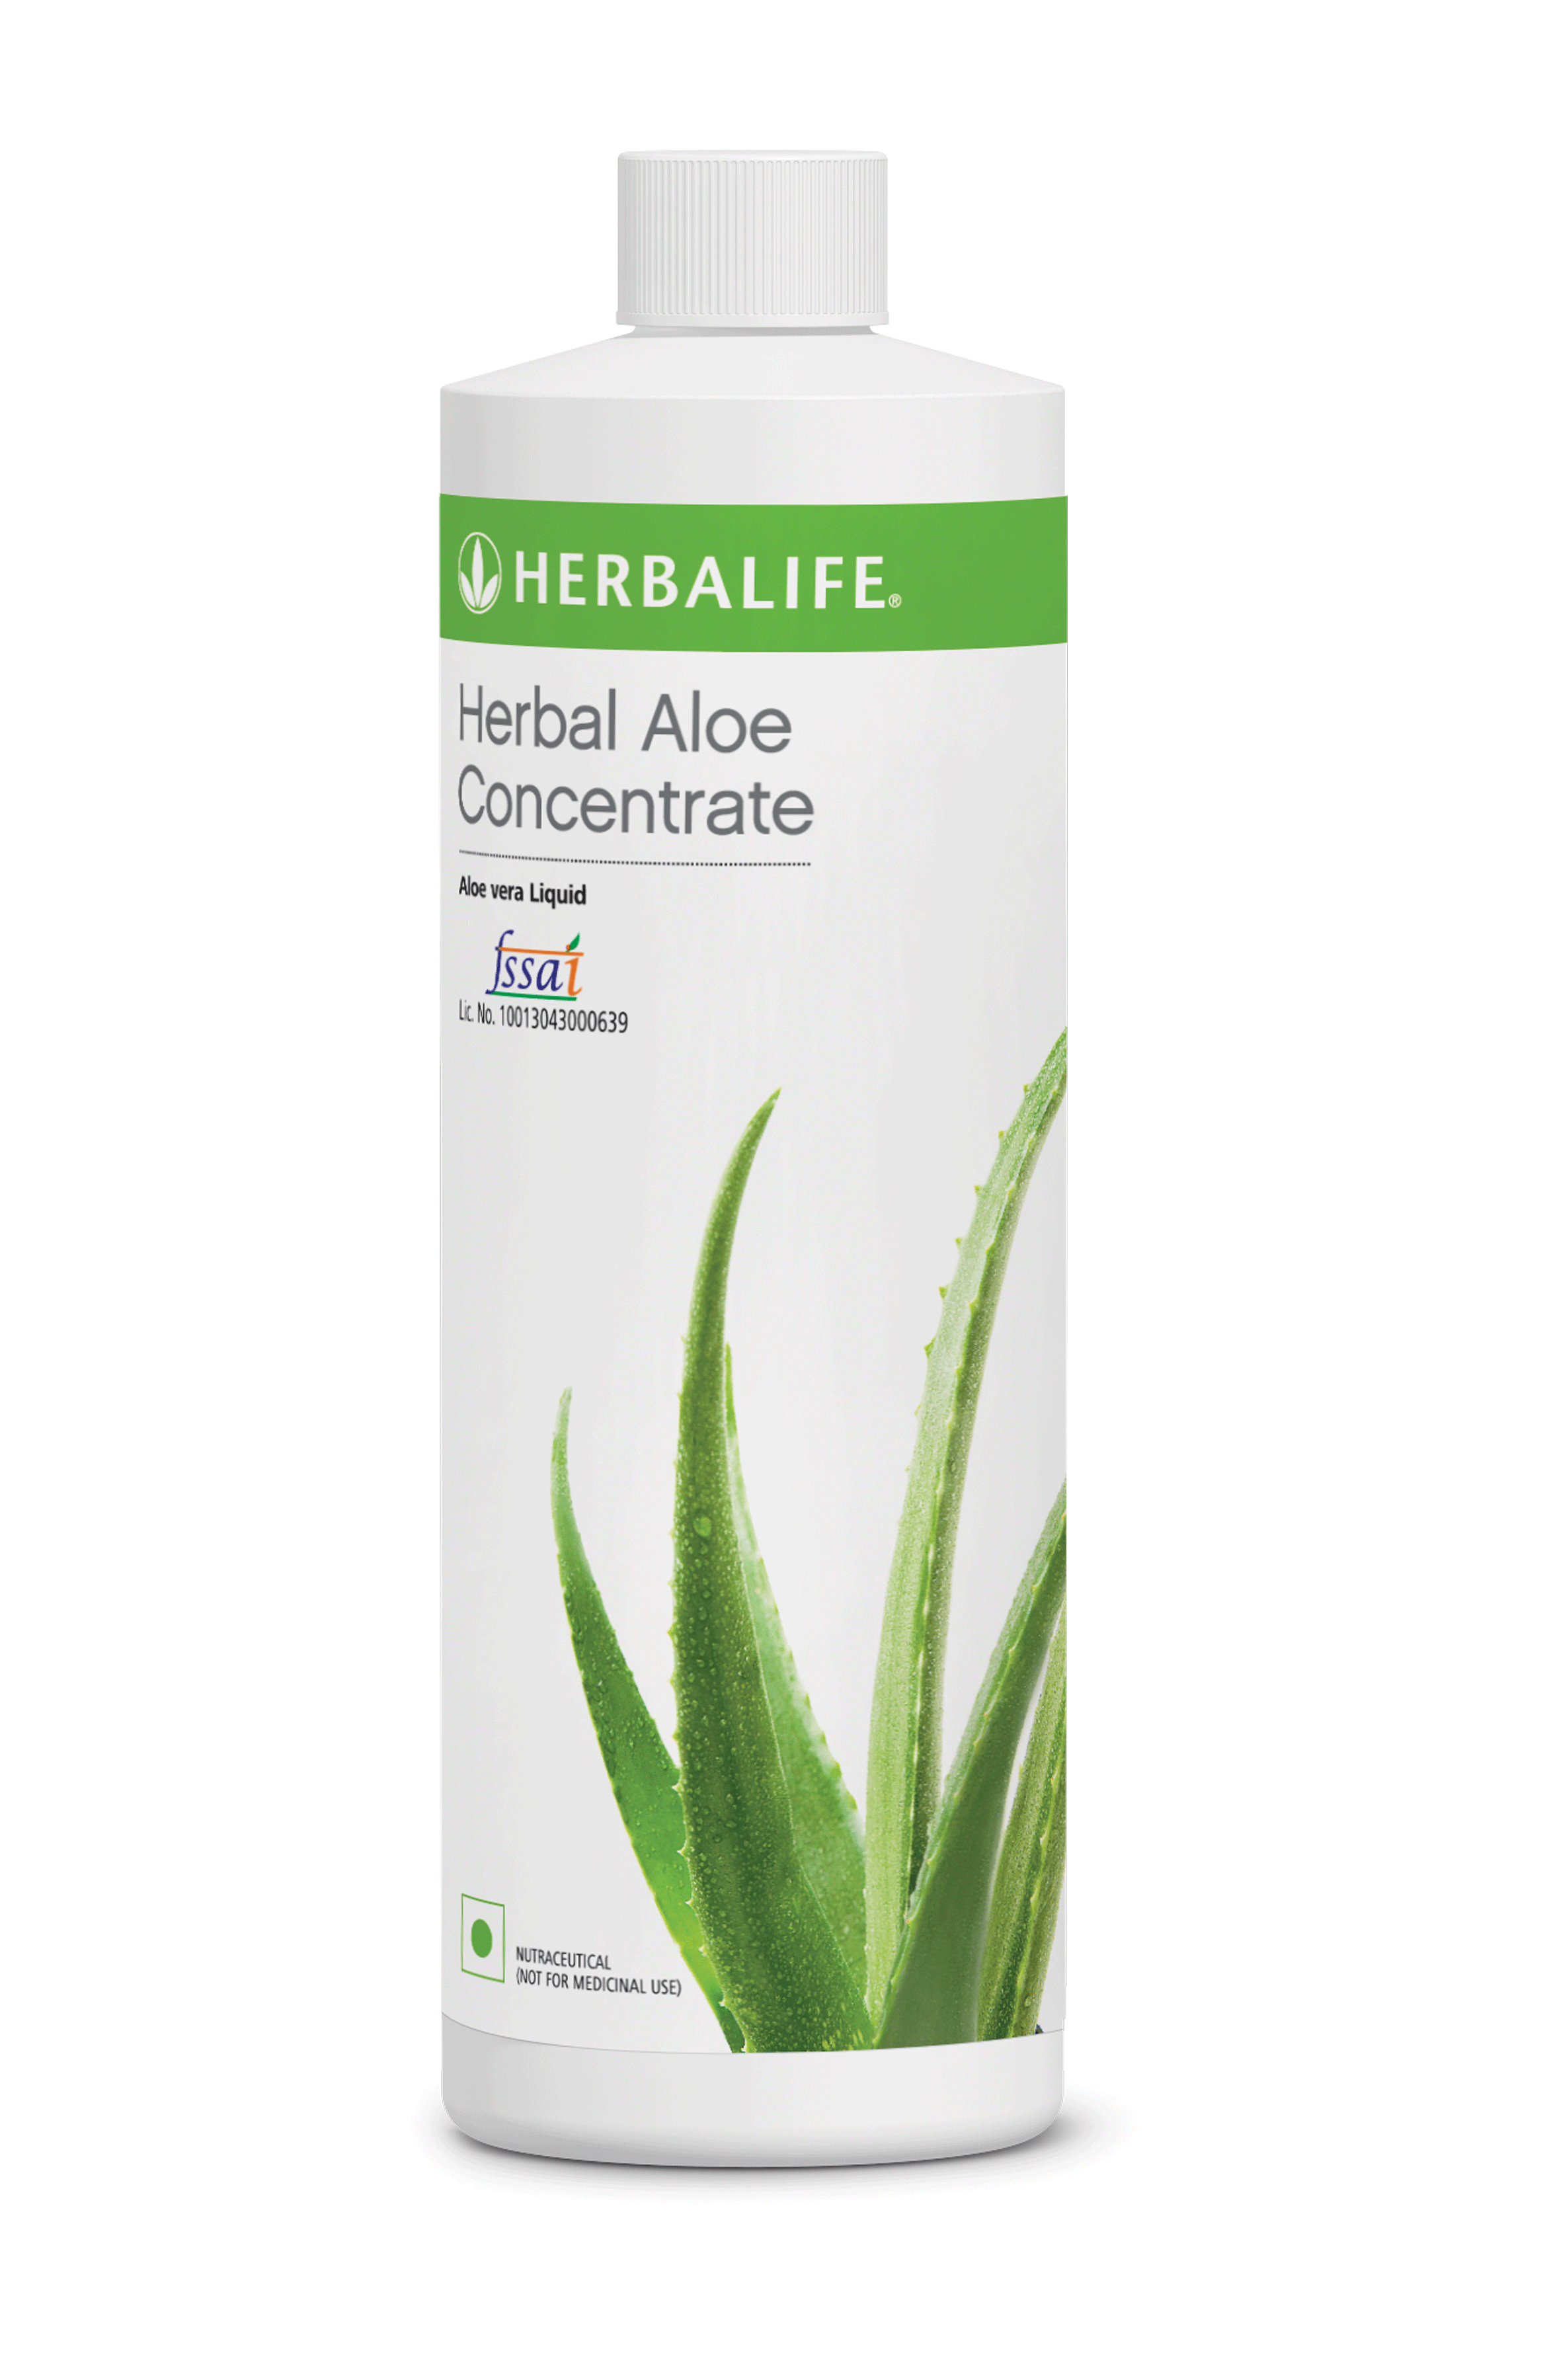 Herbalife India launches Herbal Aloe Concentrate to ... - Herbalife Products